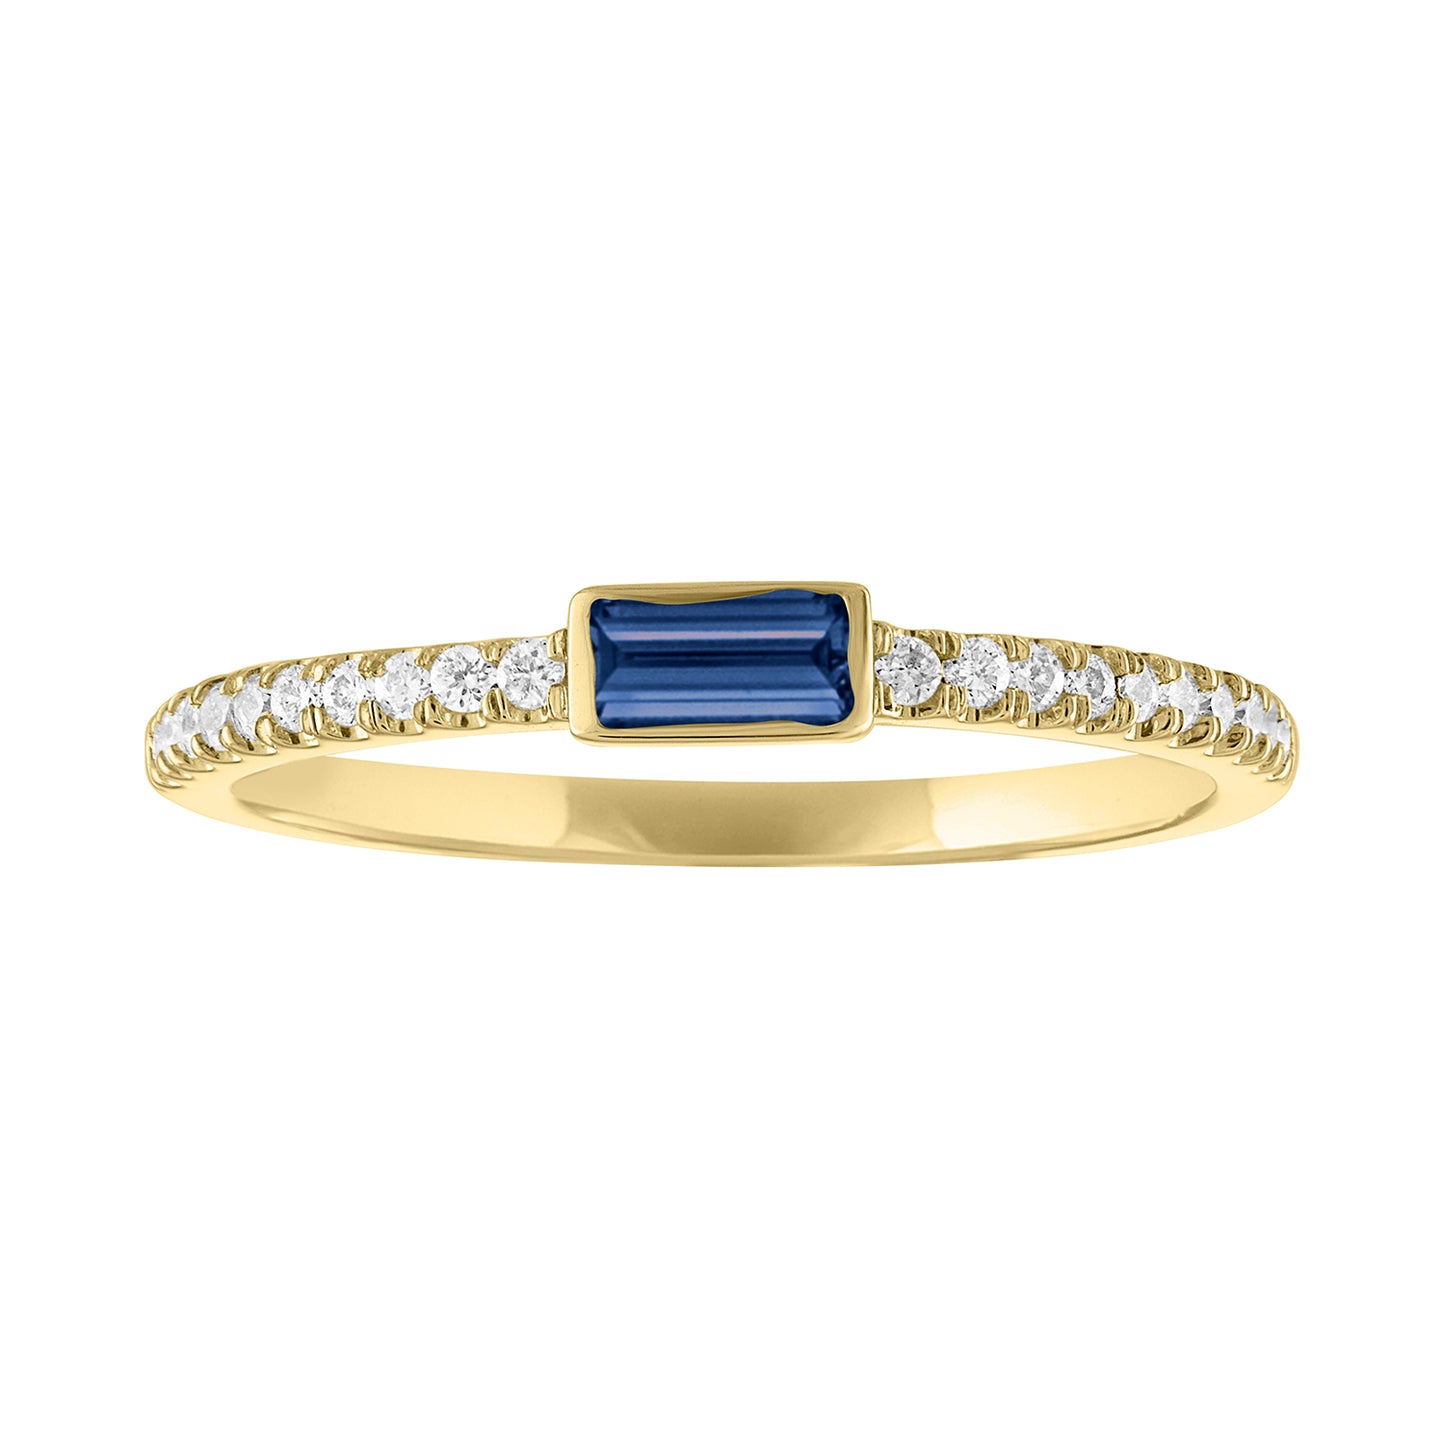 Yellow gold skinny band with a bezeled sapphire baguette in the center and round diamonds on the shank. 